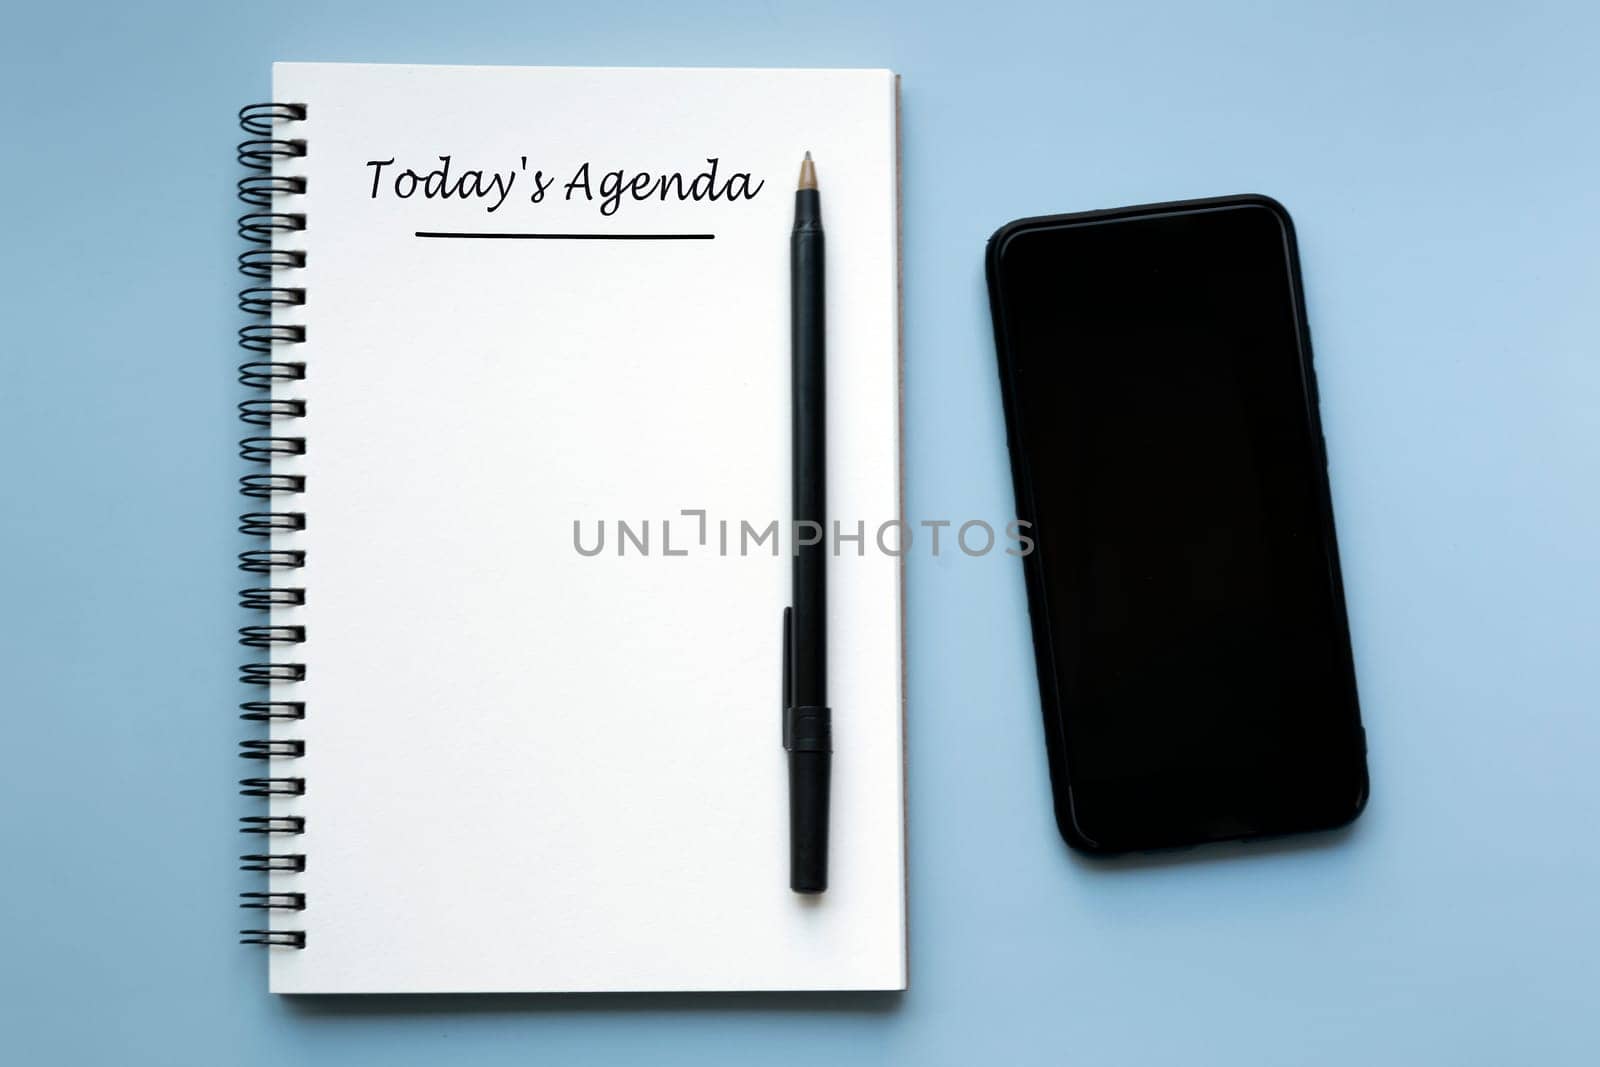 TODAY'S AGENDA written on notebook with pen and smartphone on blue background. by JennMiranda